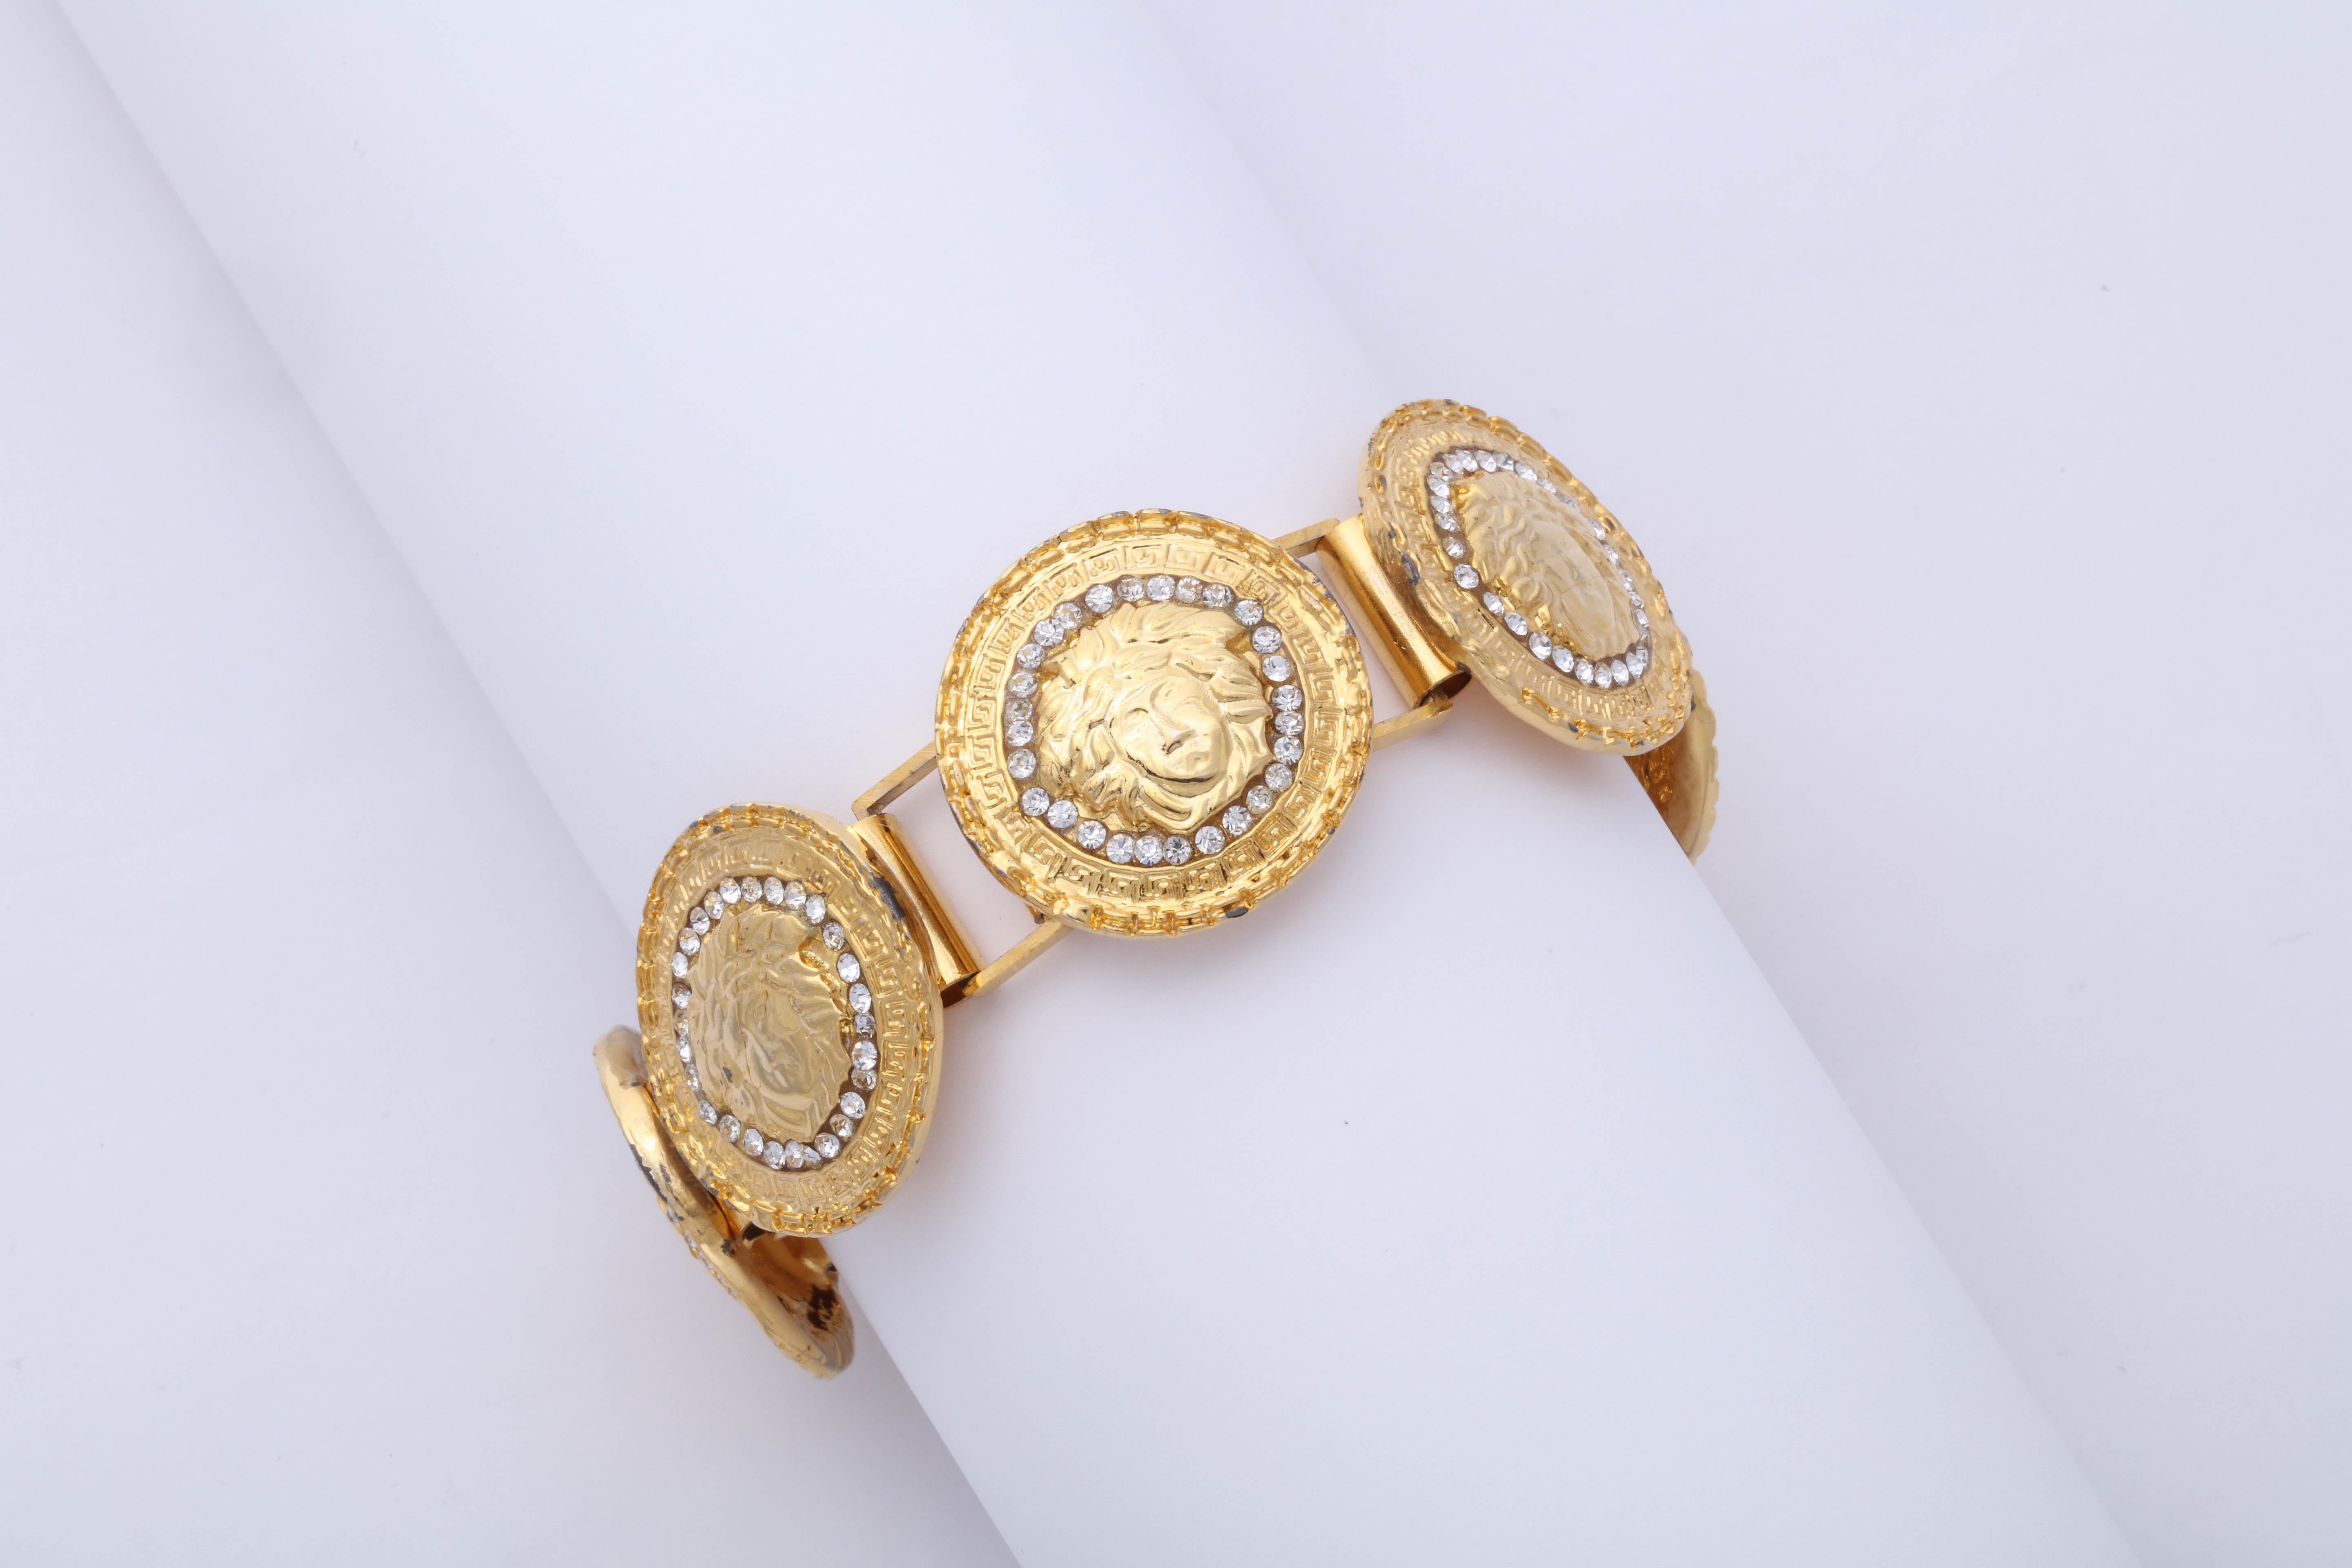 Gianni Versace Gold Toned Bracelet With 6 Medusas and Rhinestones For Sale 3